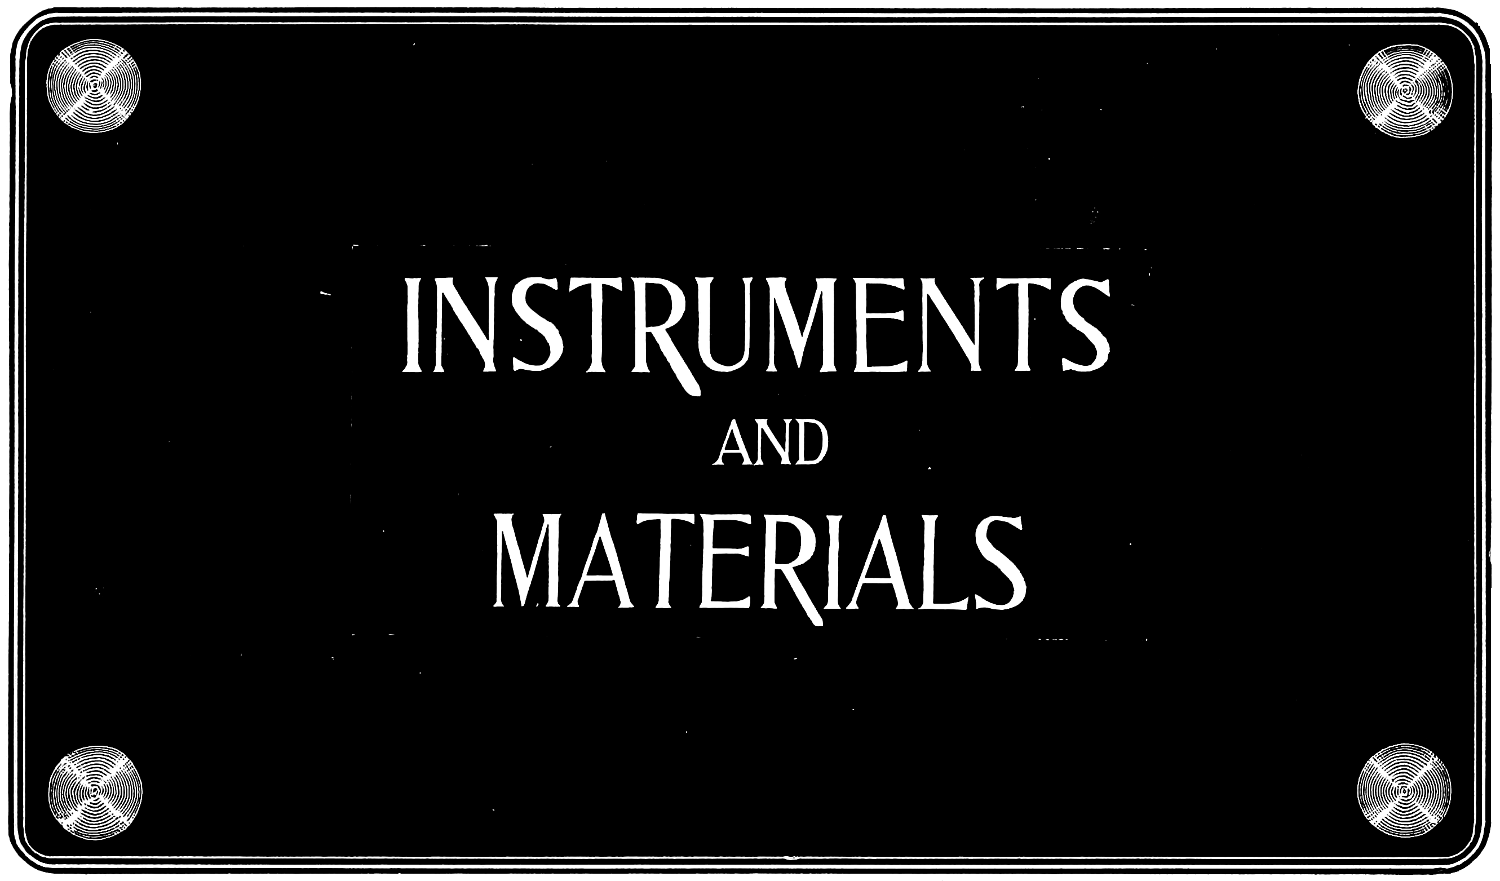 INSTRUMENTS AND MATERIALS